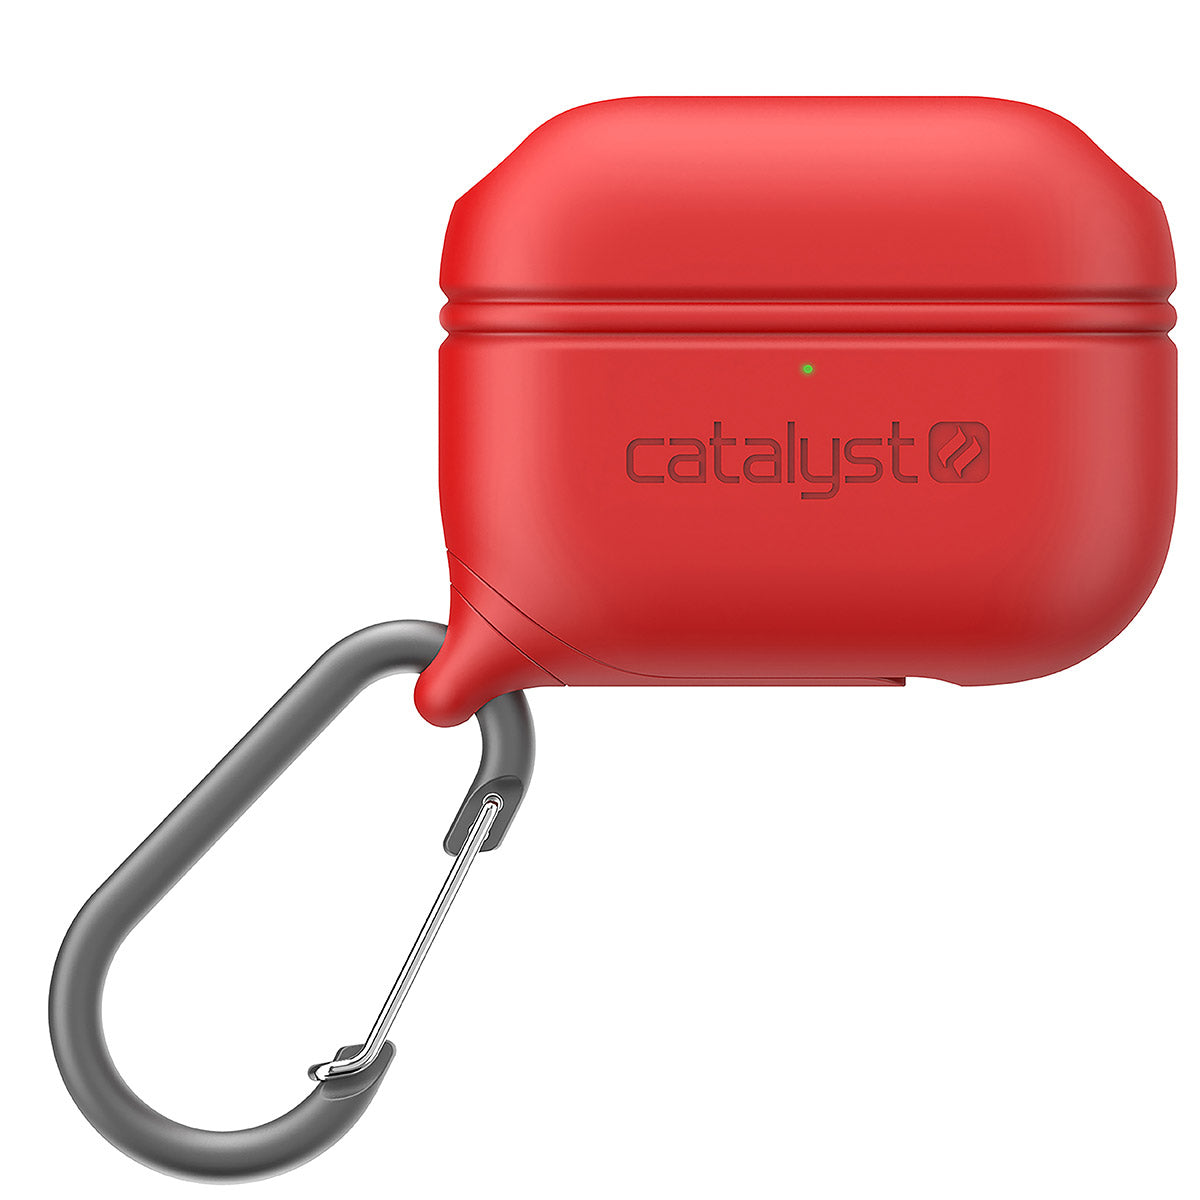 catalyst airpods pro gen 2 1 waterproof case carabiner special edition red front view